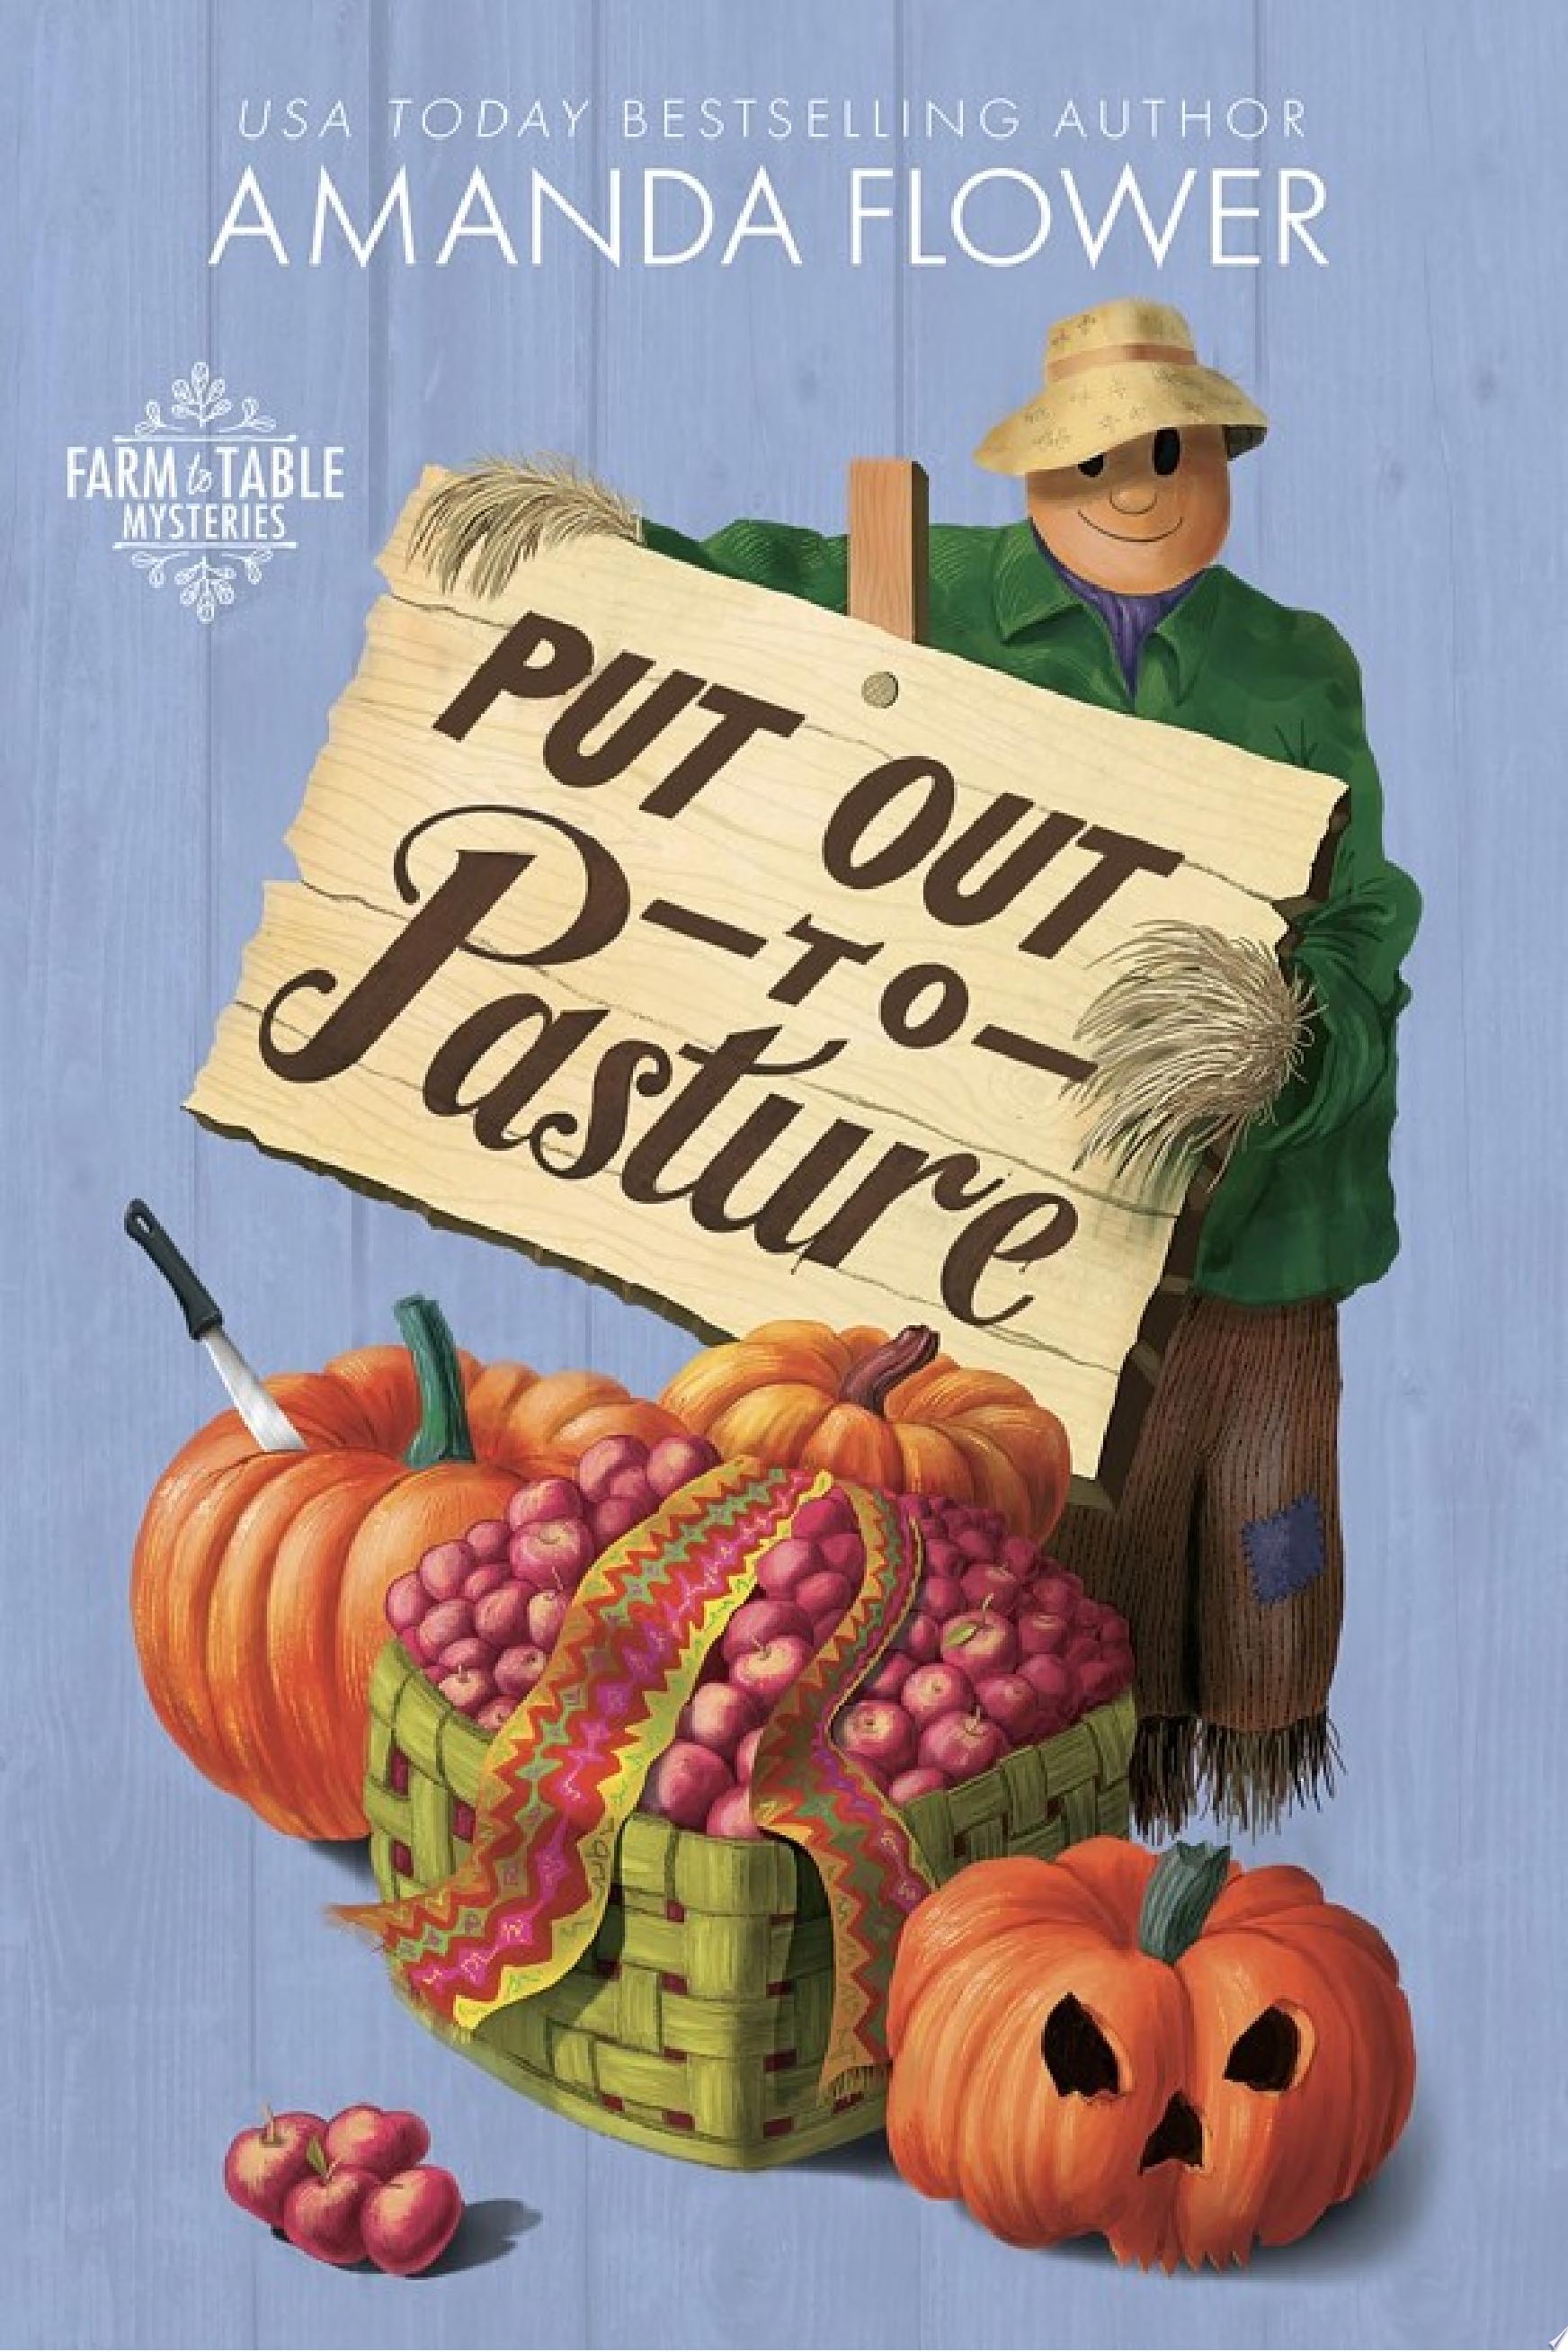 Image for "Put Out to Pasture"